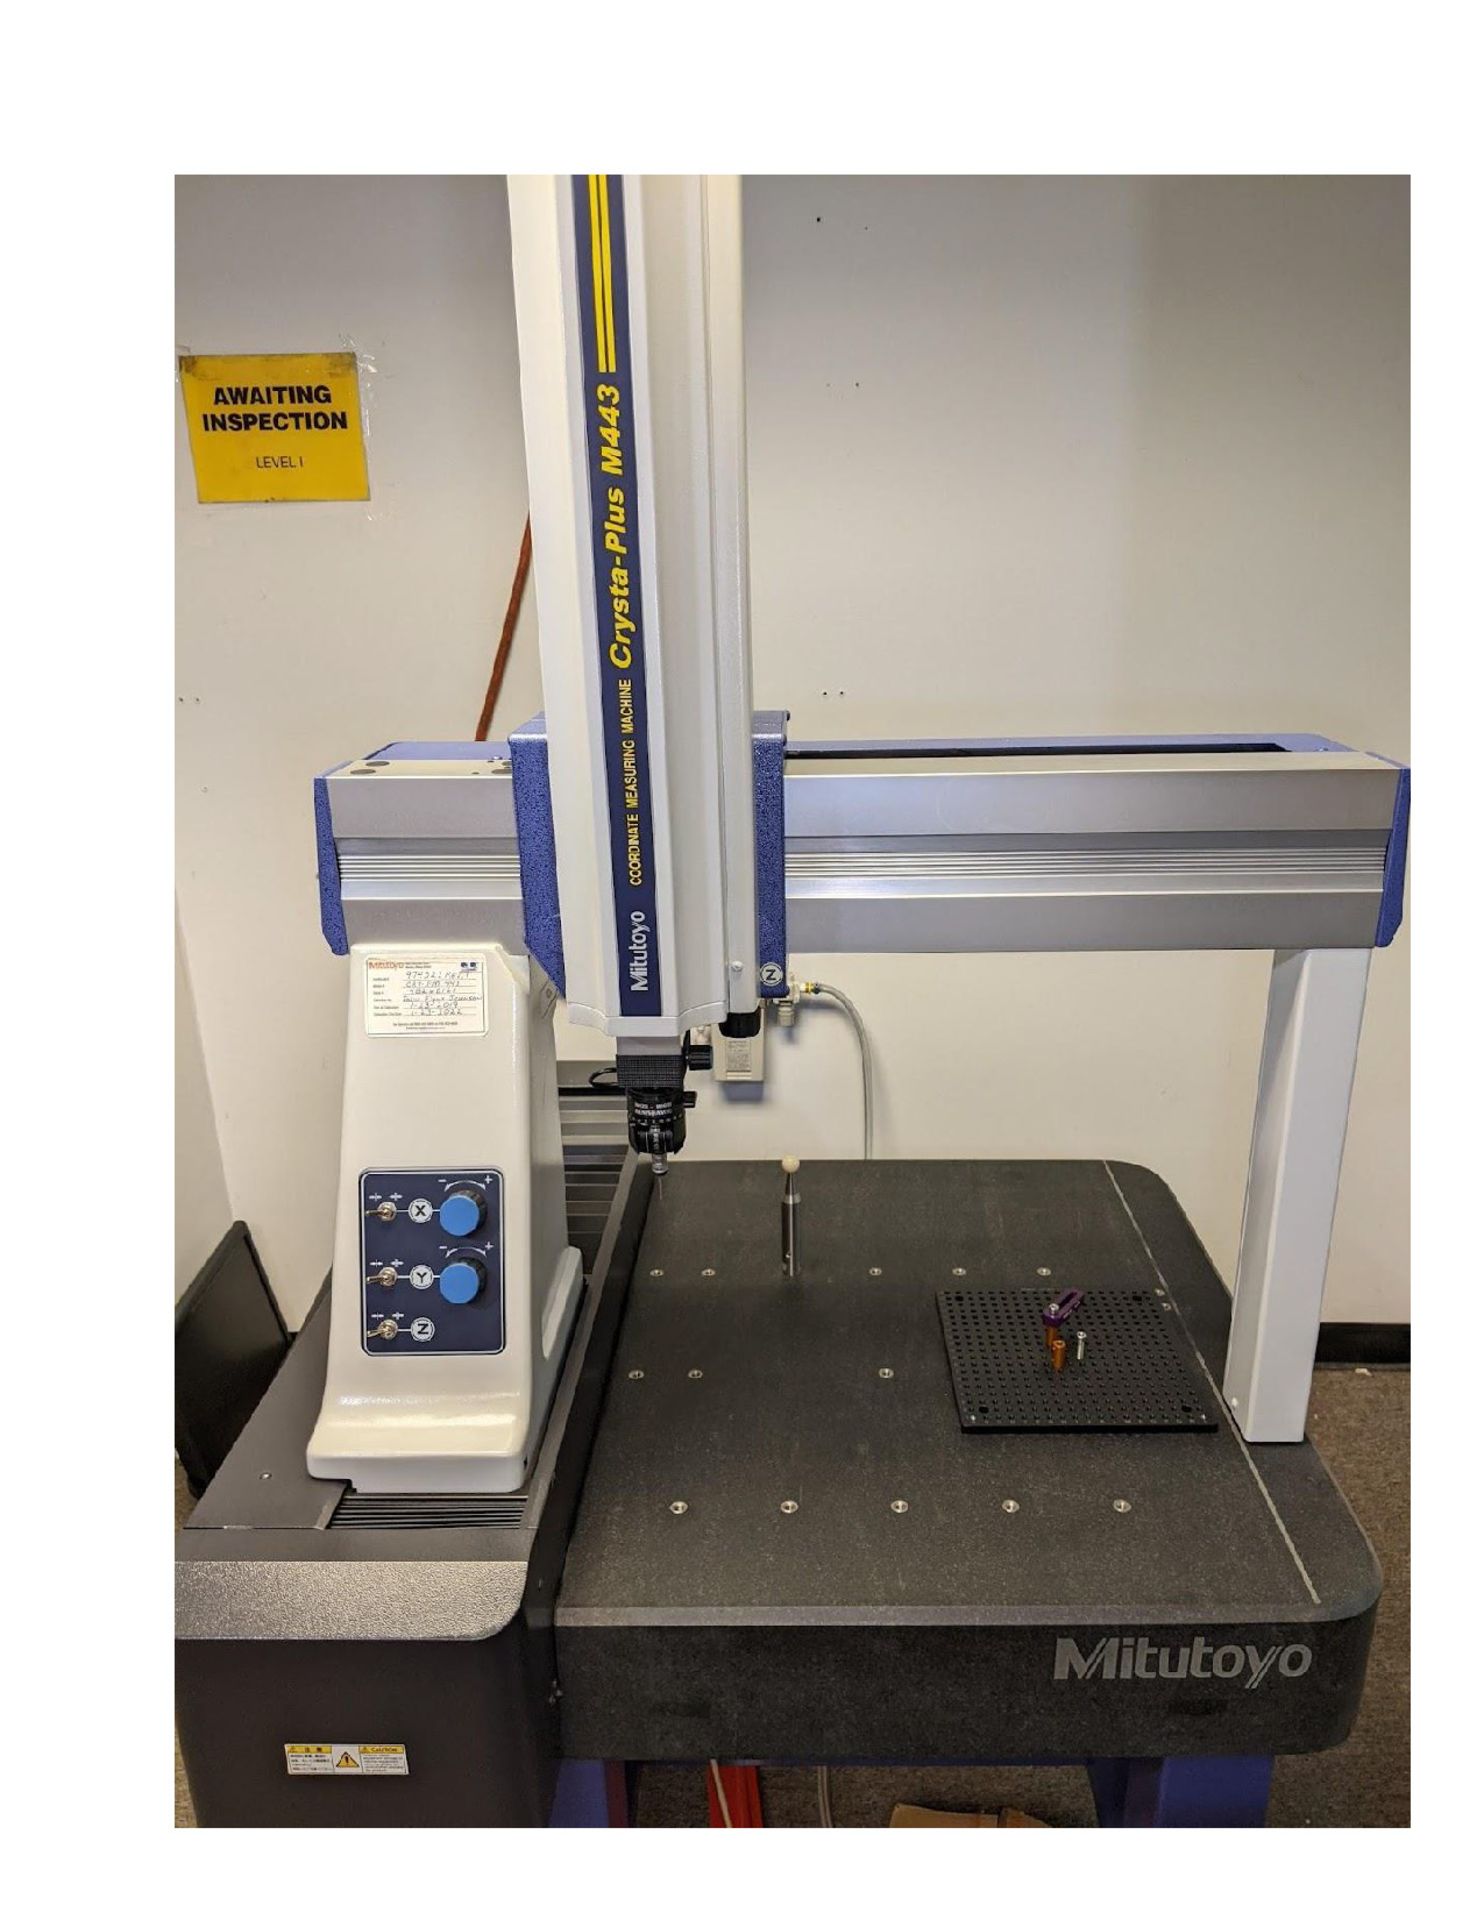 2019 MITUTOYO CRYSTA PLUS M443 SERIES COORDINATE MEASURING MACHINE WITH COMPUTER - Image 2 of 3